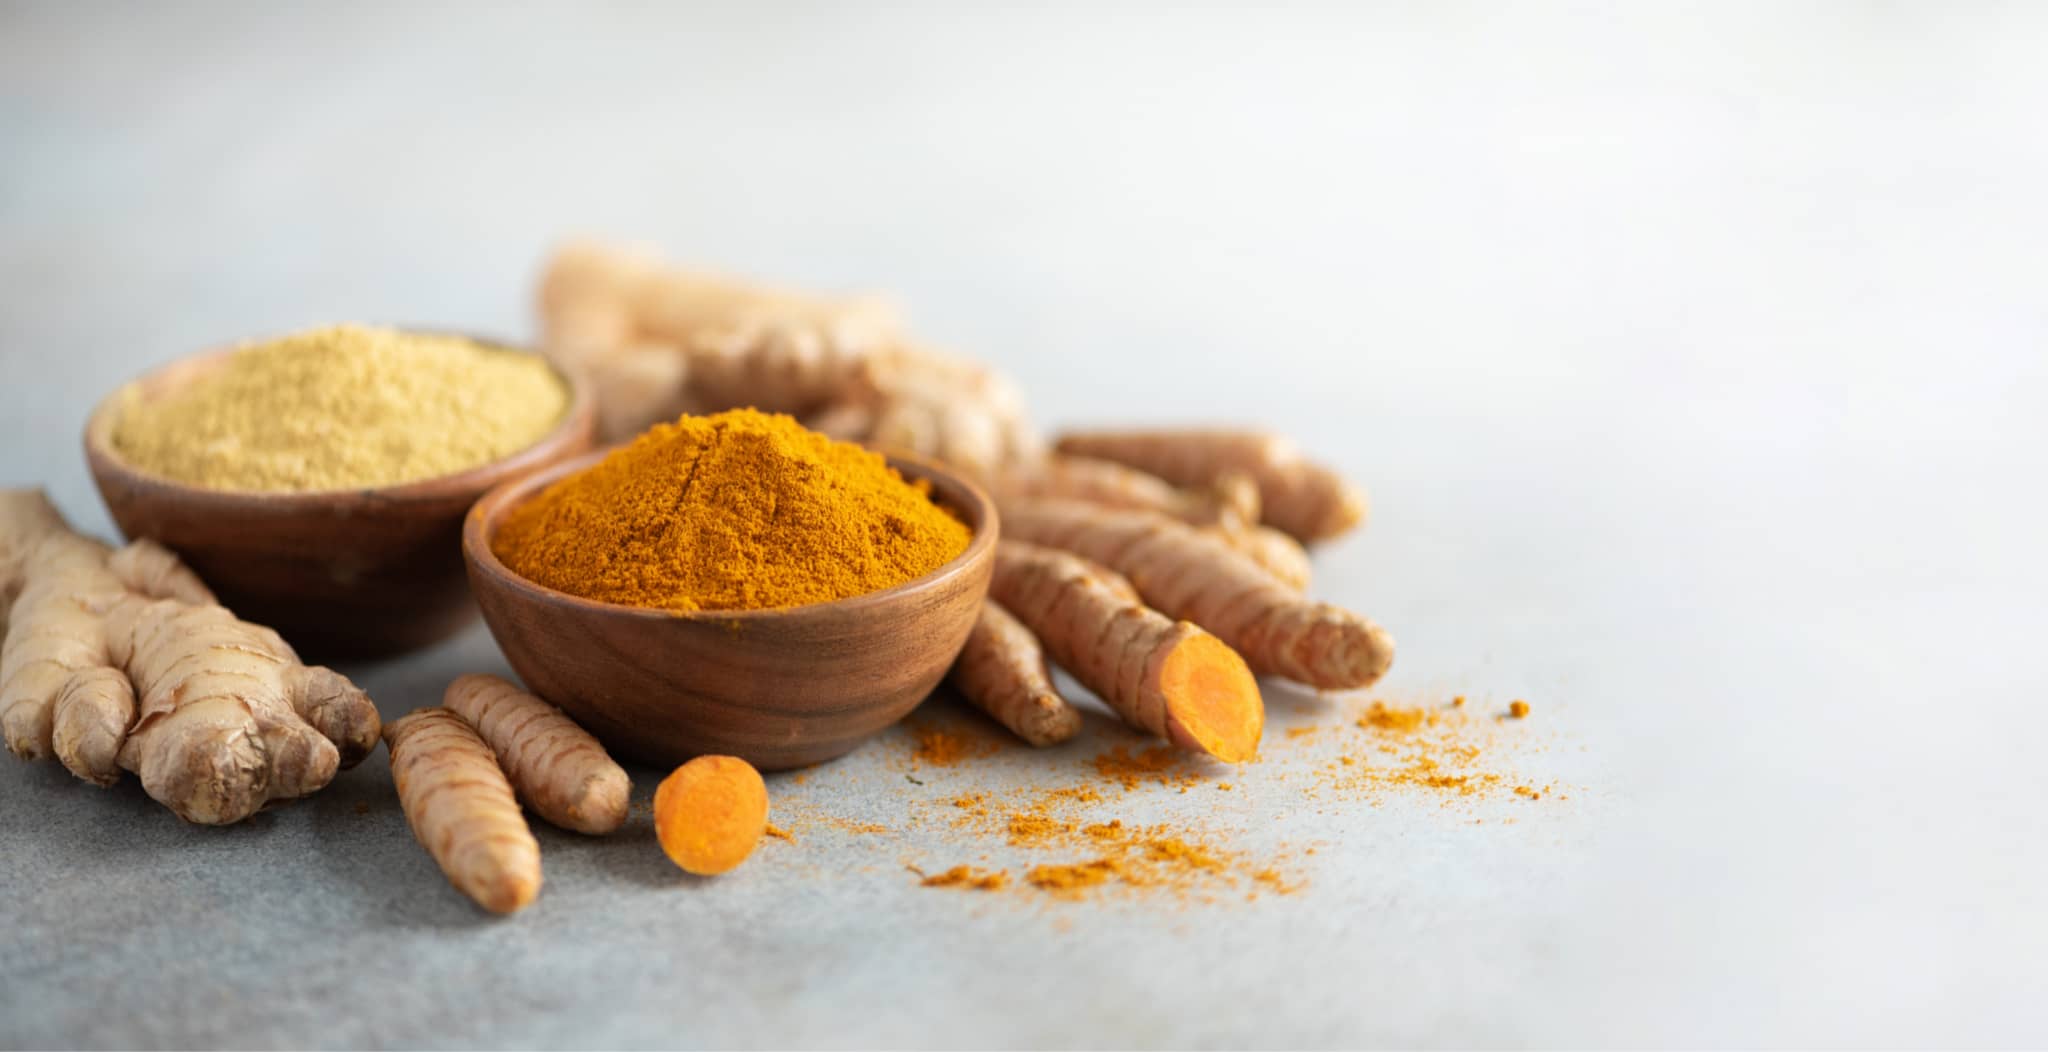 Streamz global equ streamz horse bands blog about Turmeric and its use in horse and equine healthcare